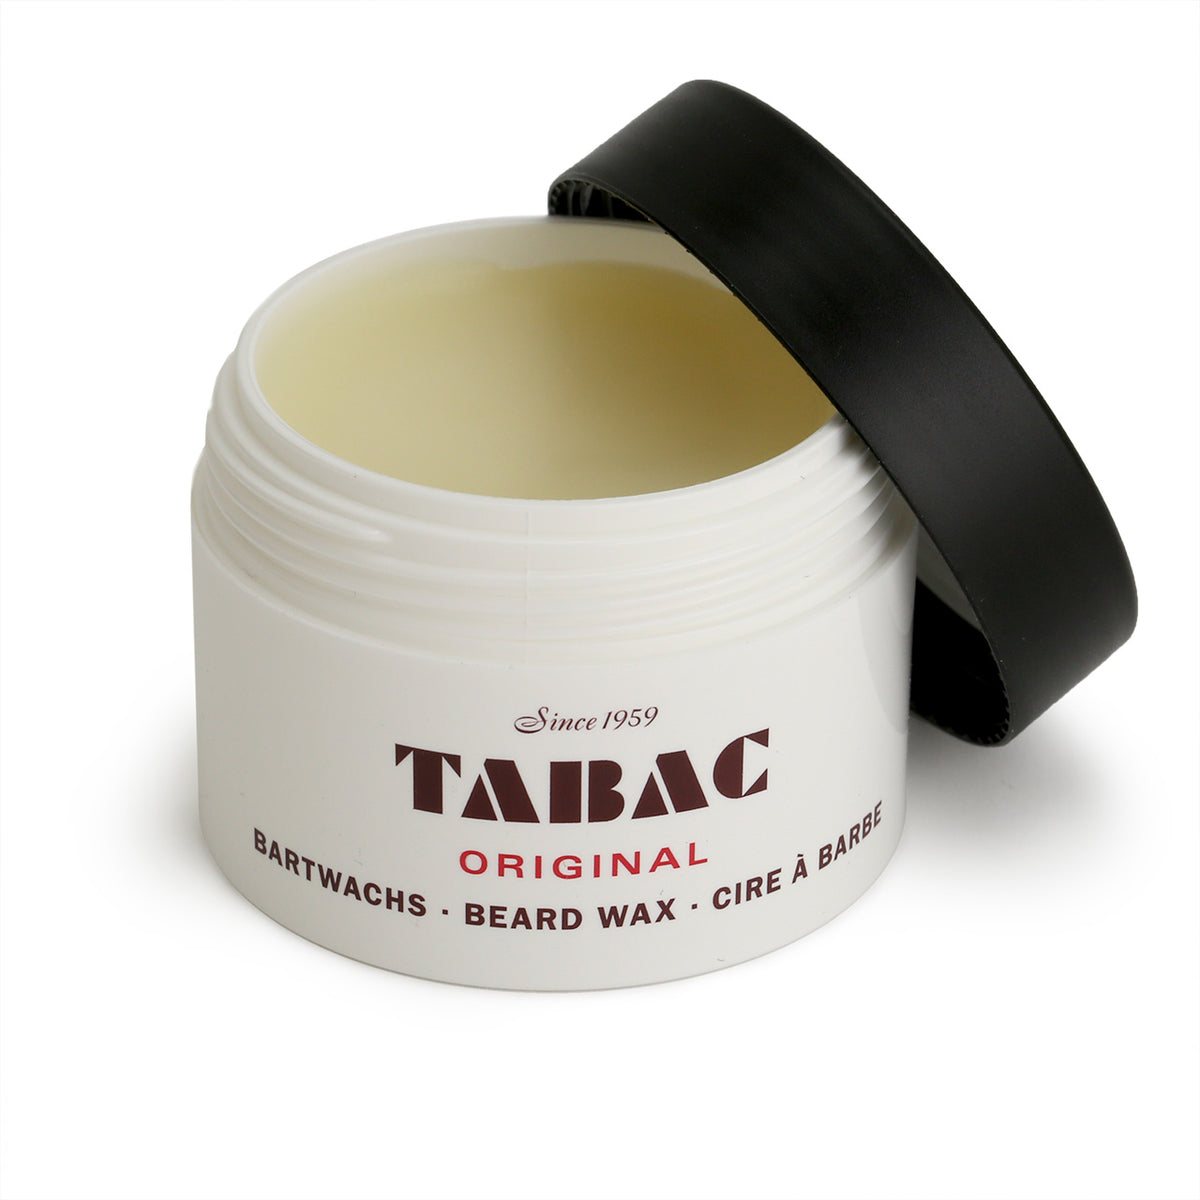 Tabac Original Beard Wax with lid off showing the pale waxy product